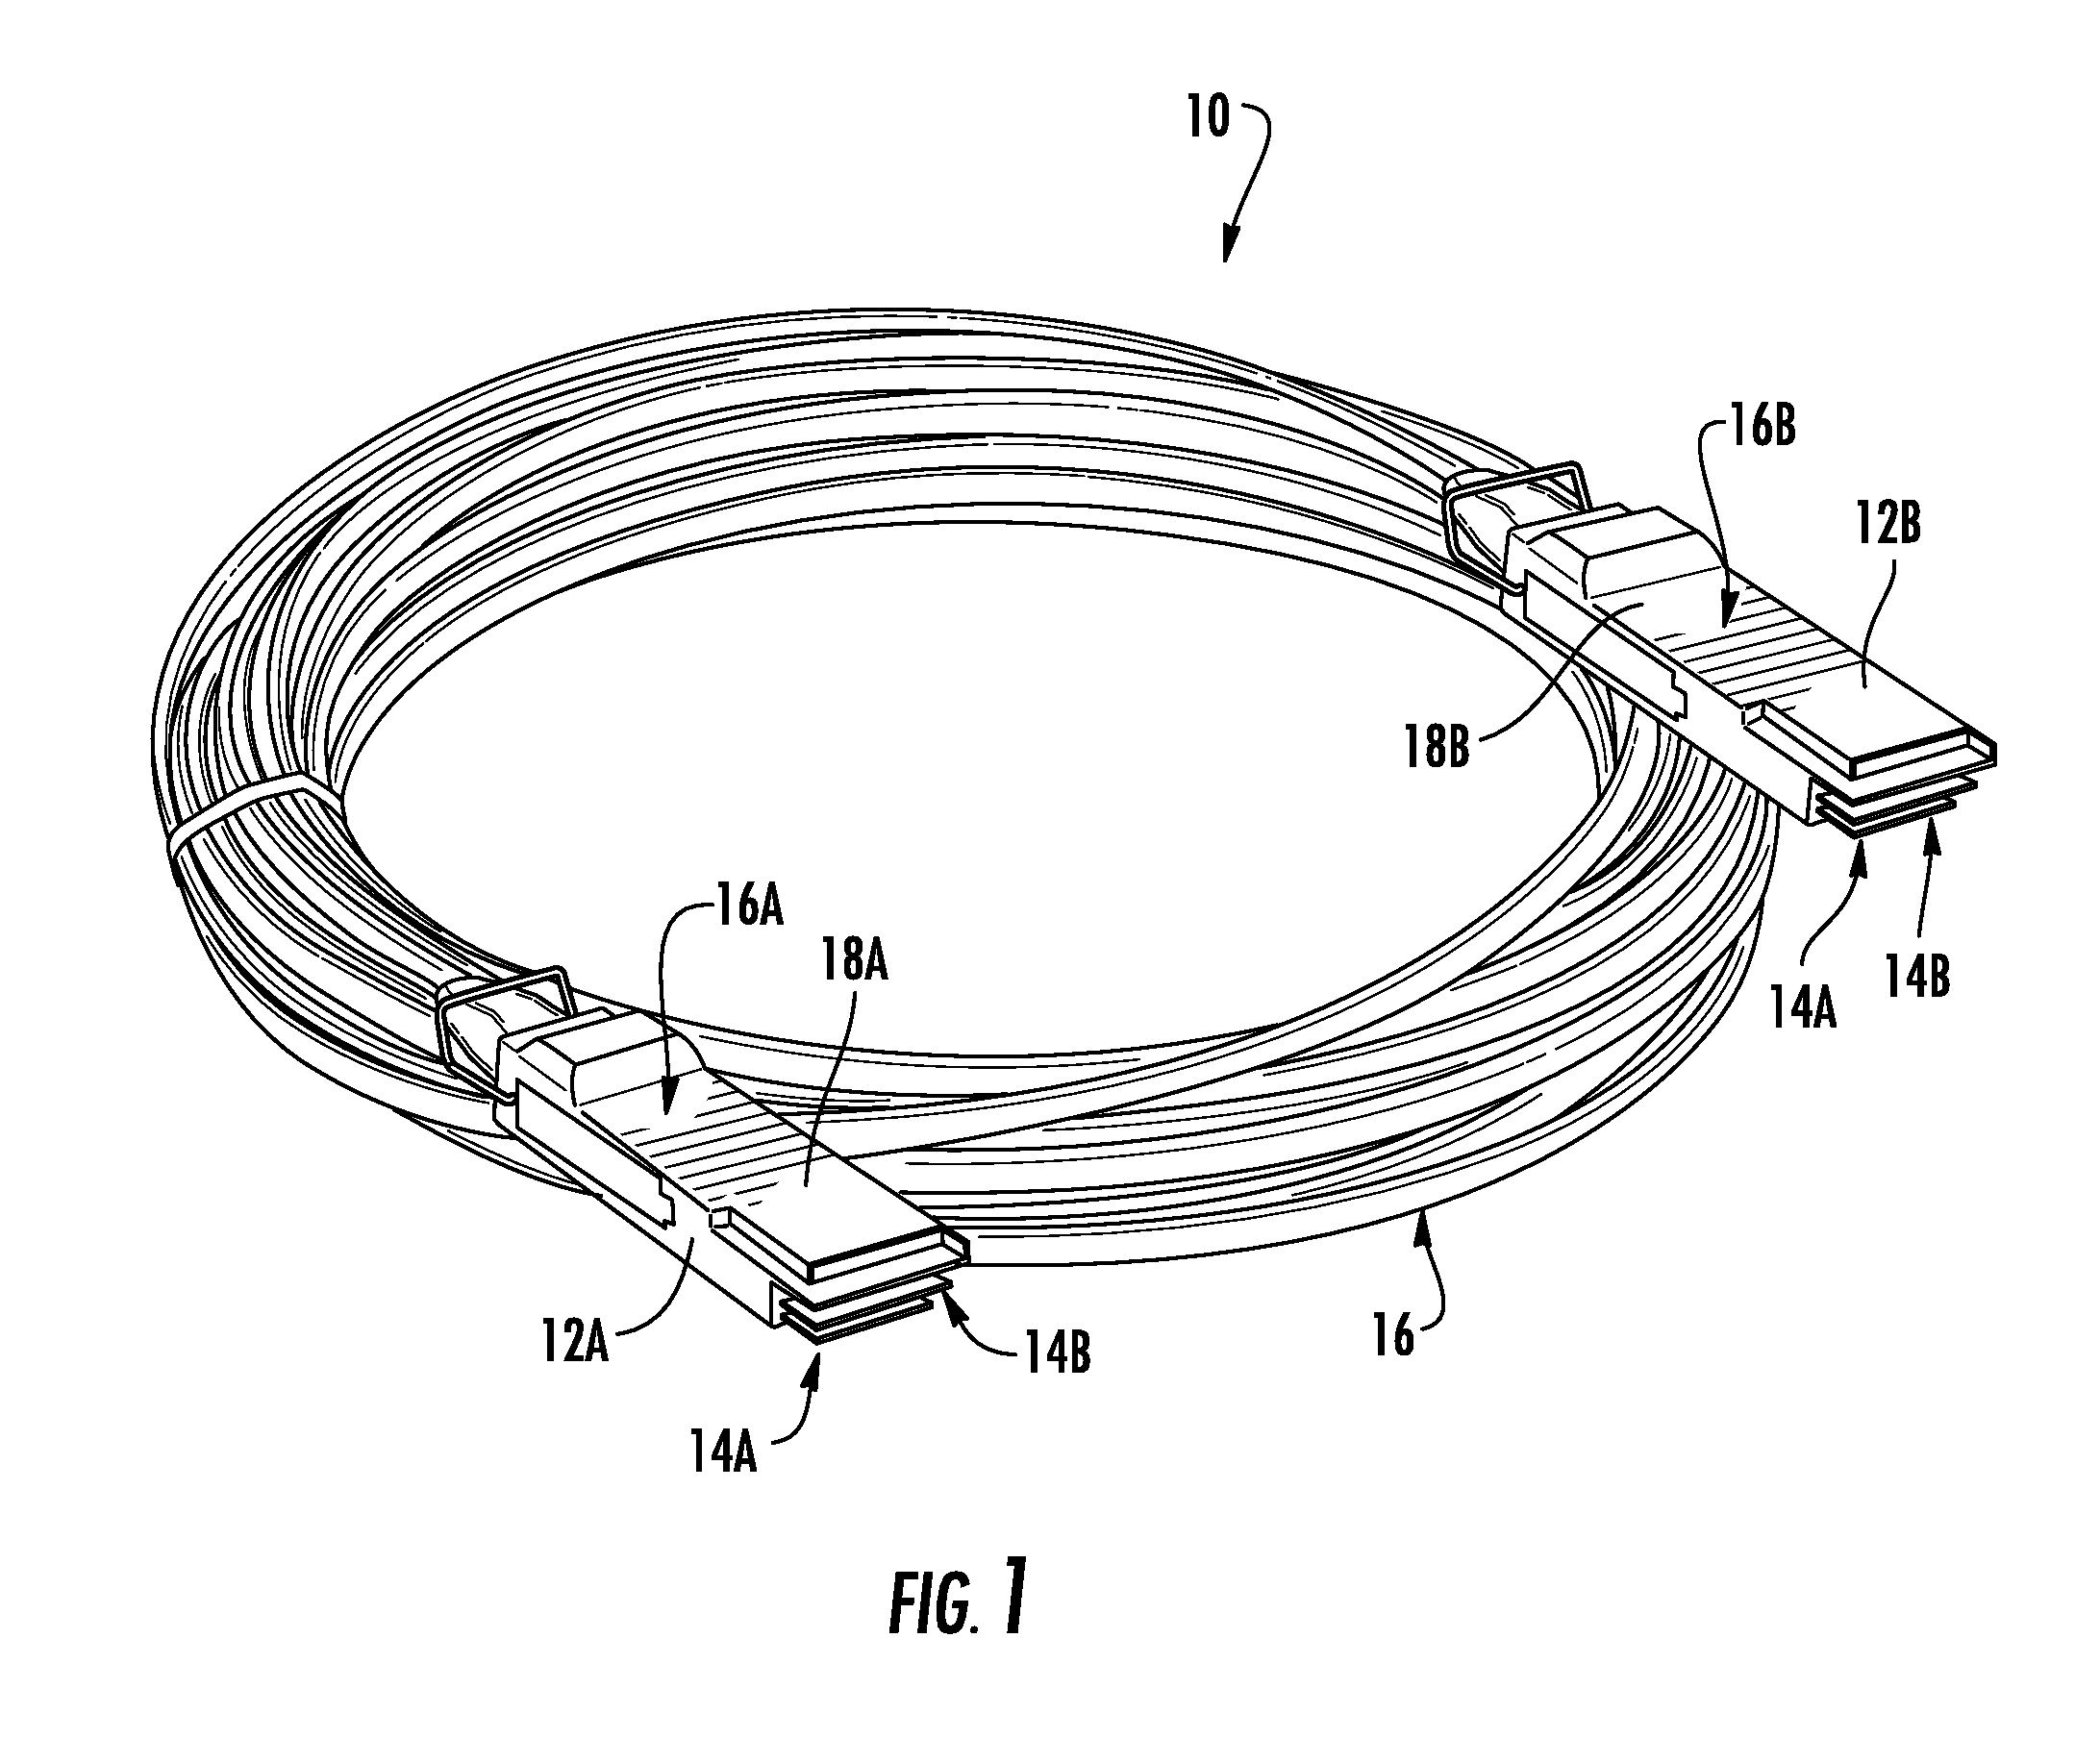 Receiver optical assemblies (ROAS) having photo-detector remotely located from transimpedance amplifier, and related components, circuits, and methods